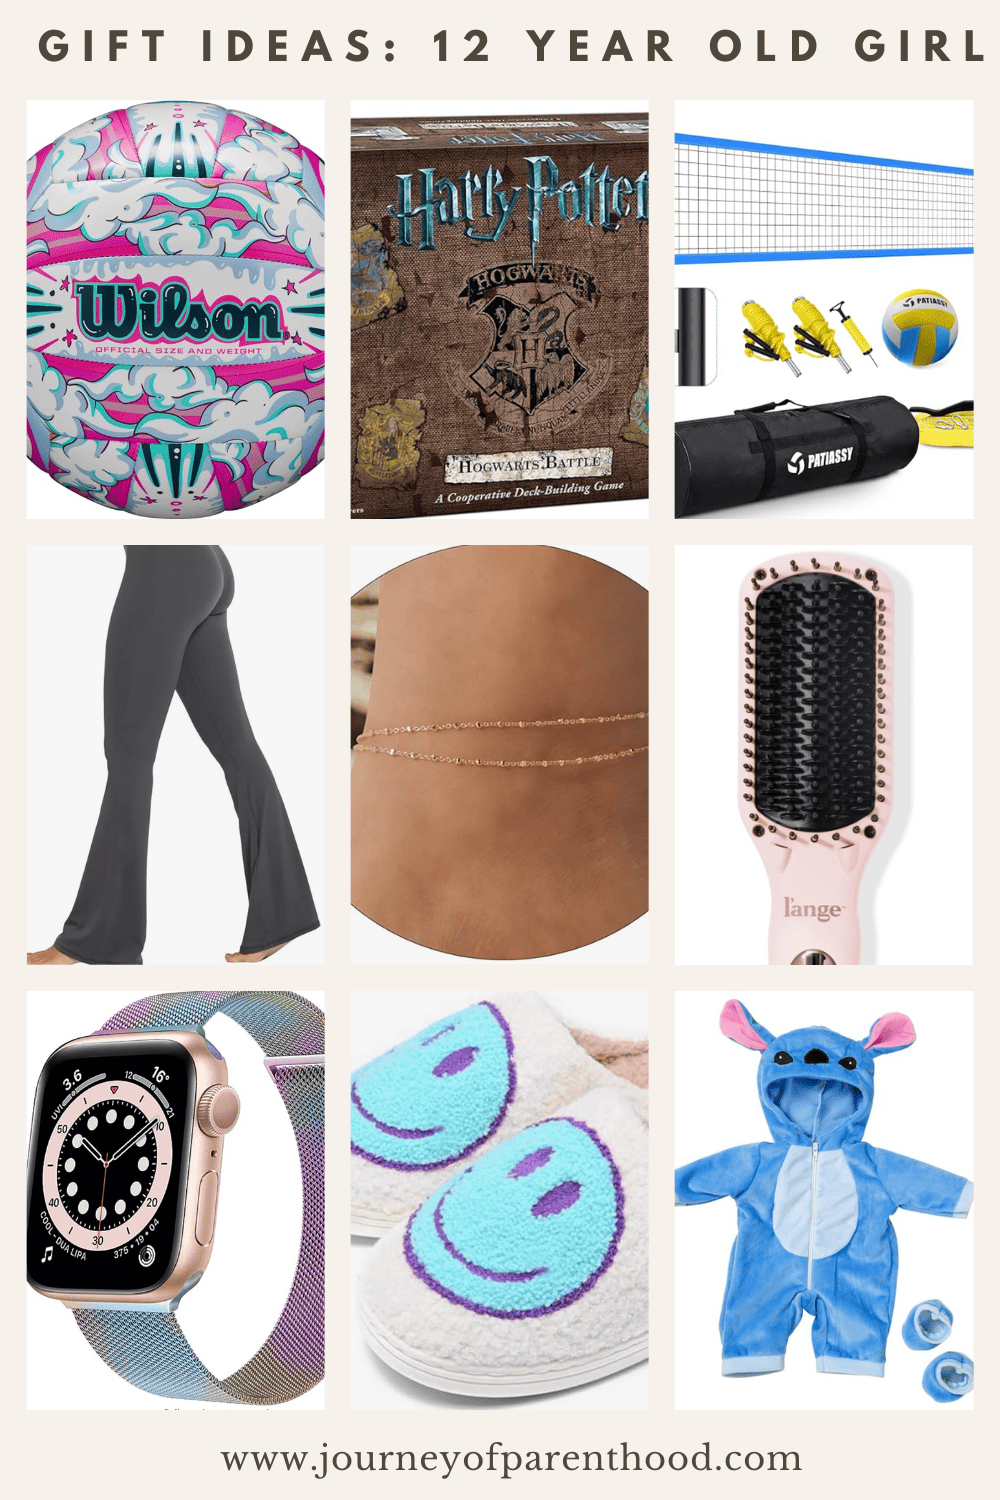 gift ideas for a 12 year old girl - preteen gift guide for girls and what I'm buying my 12 year old daughter for Christmas this year 